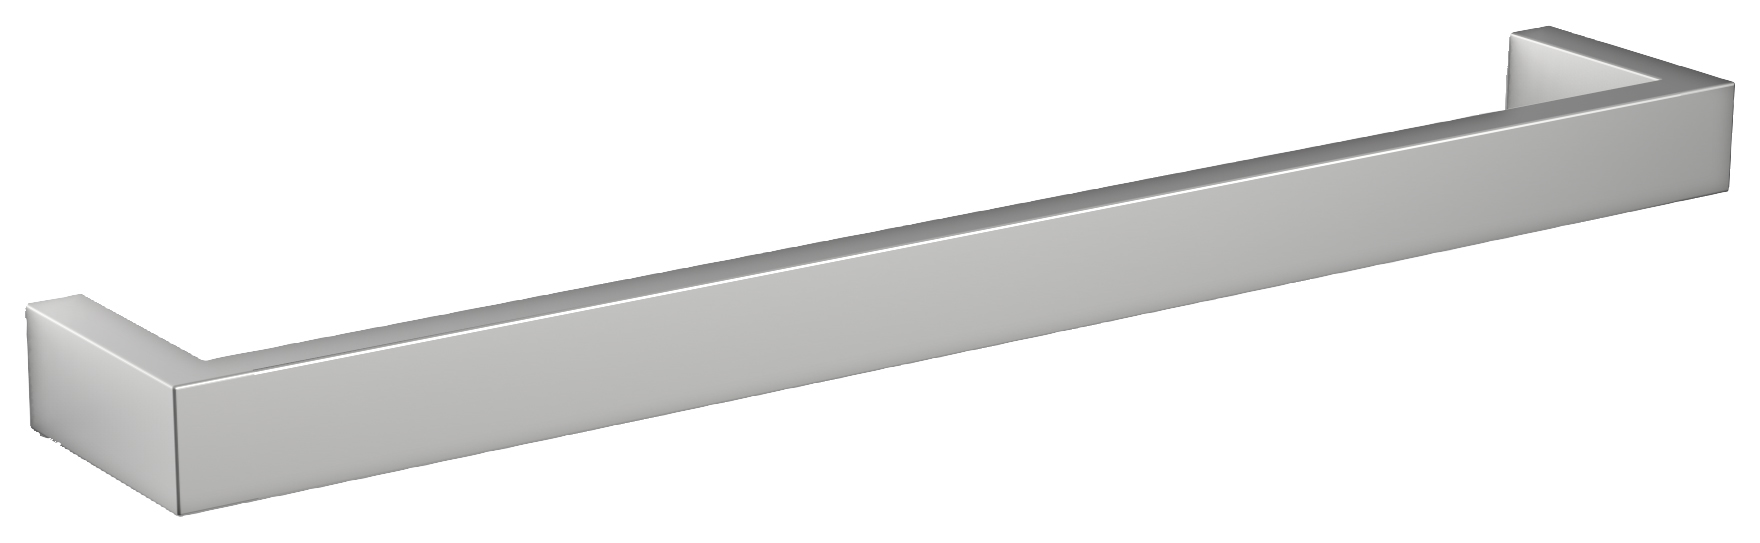 Image of Towelrads Elcot Brushed Stainless Dry Electric Towel Bar - 630mm